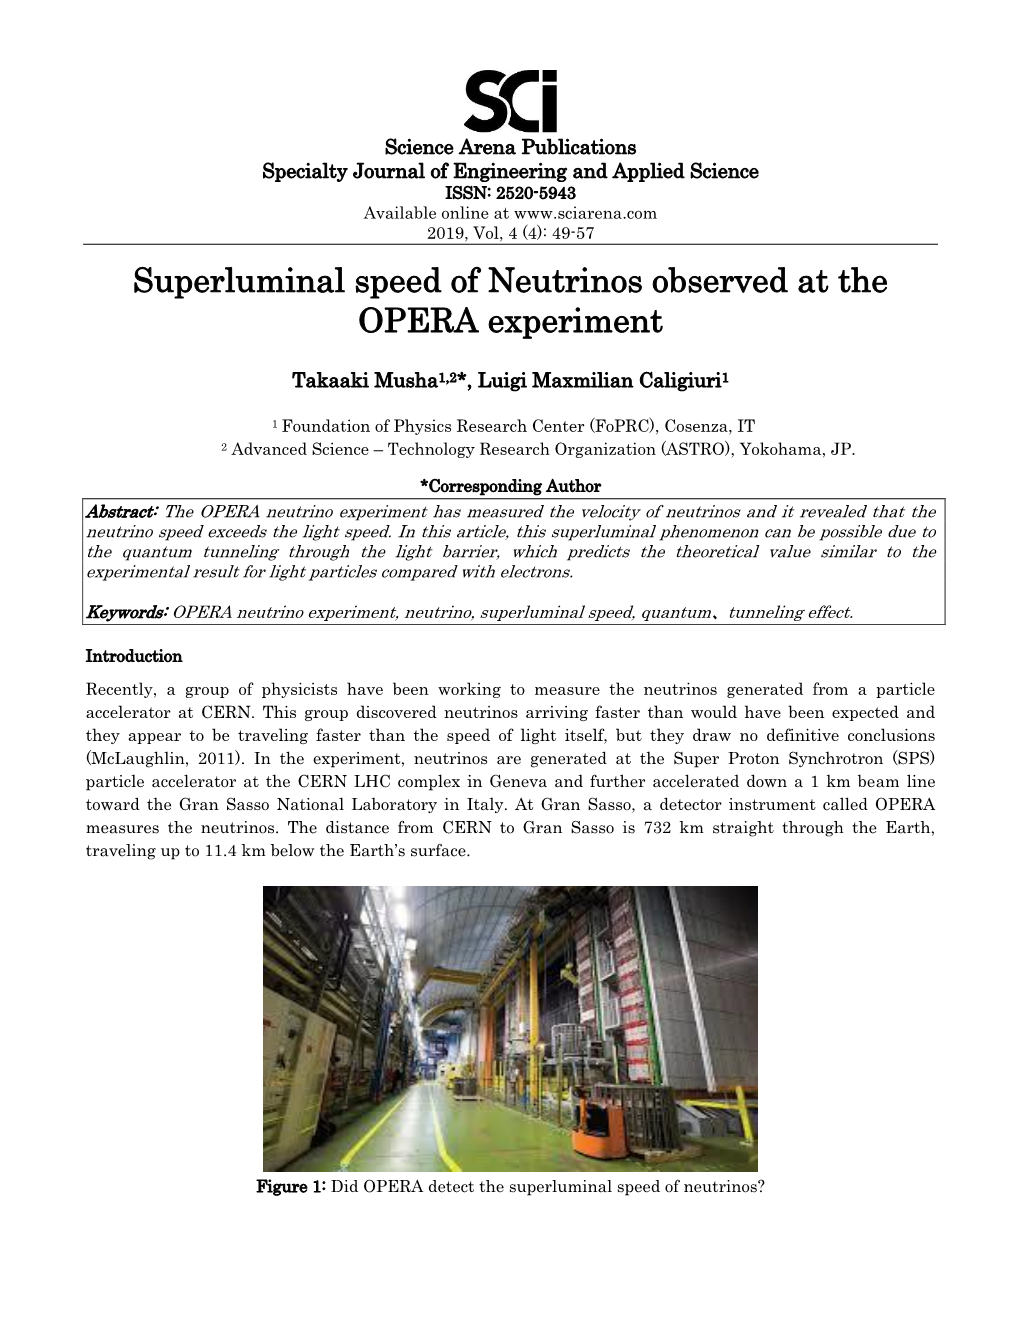 Superluminal Speed of Neutrinos Observed at the OPERA Experiment